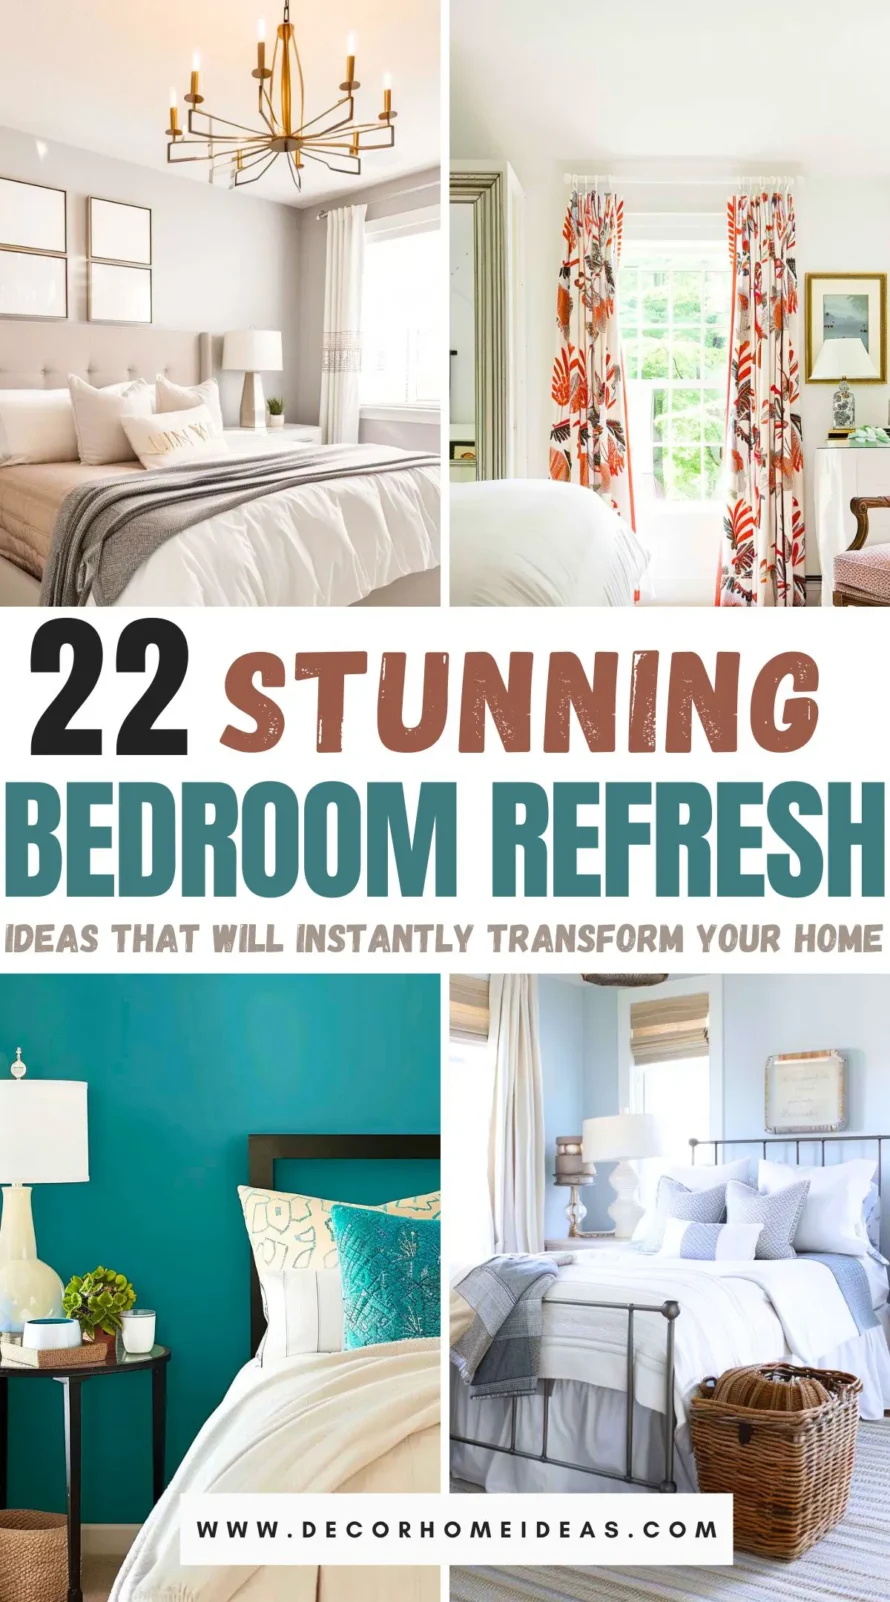 Looking to give your bedroom a fresh new look? Discover 20 easy and inspiring bedroom refresh ideas that will instantly transform your home. From clever storage solutions to stylish decor updates, these tips will help you create a cozy and inviting retreat. 